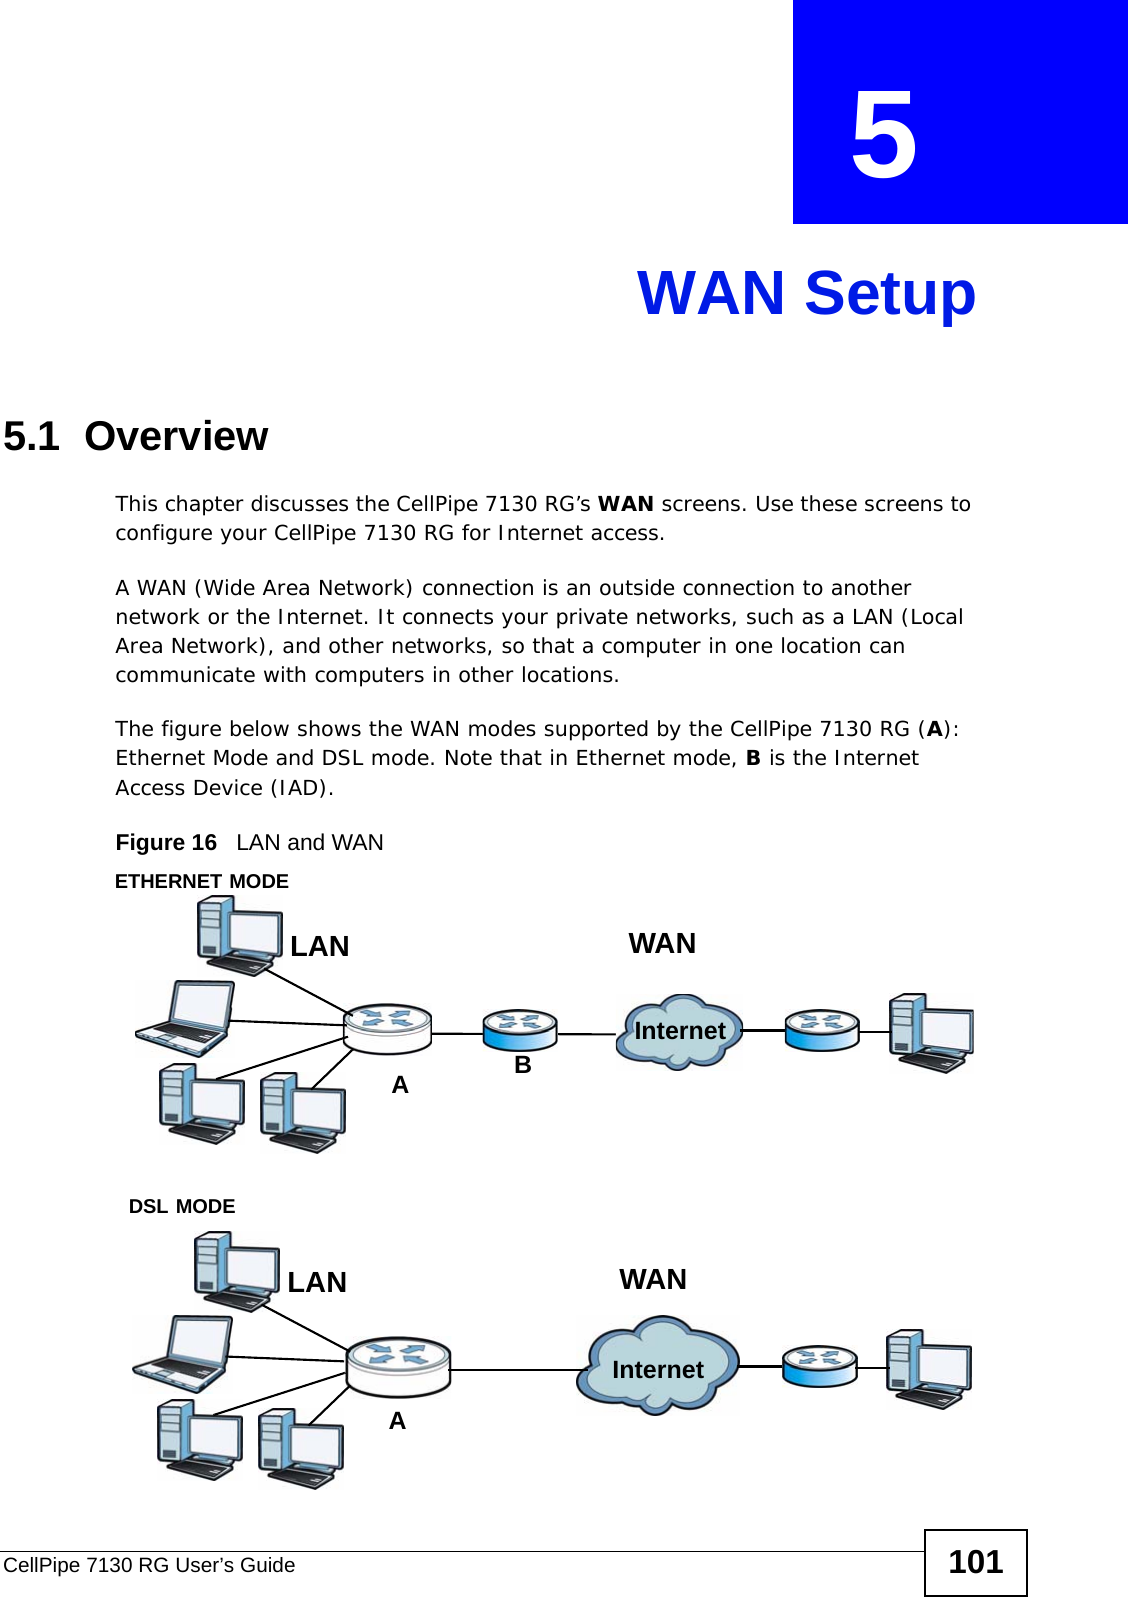 CellPipe 7130 RG User’s Guide 101CHAPTER  5 WAN Setup5.1  OverviewThis chapter discusses the CellPipe 7130 RG’s WAN screens. Use these screens to configure your CellPipe 7130 RG for Internet access.A WAN (Wide Area Network) connection is an outside connection to another network or the Internet. It connects your private networks, such as a LAN (Local Area Network), and other networks, so that a computer in one location can communicate with computers in other locations.The figure below shows the WAN modes supported by the CellPipe 7130 RG (A): Ethernet Mode and DSL mode. Note that in Ethernet mode, B is the Internet Access Device (IAD).Figure 16   LAN and WANInternetWANLANAWANLANADSL MODEETHERNET MODEInternetB